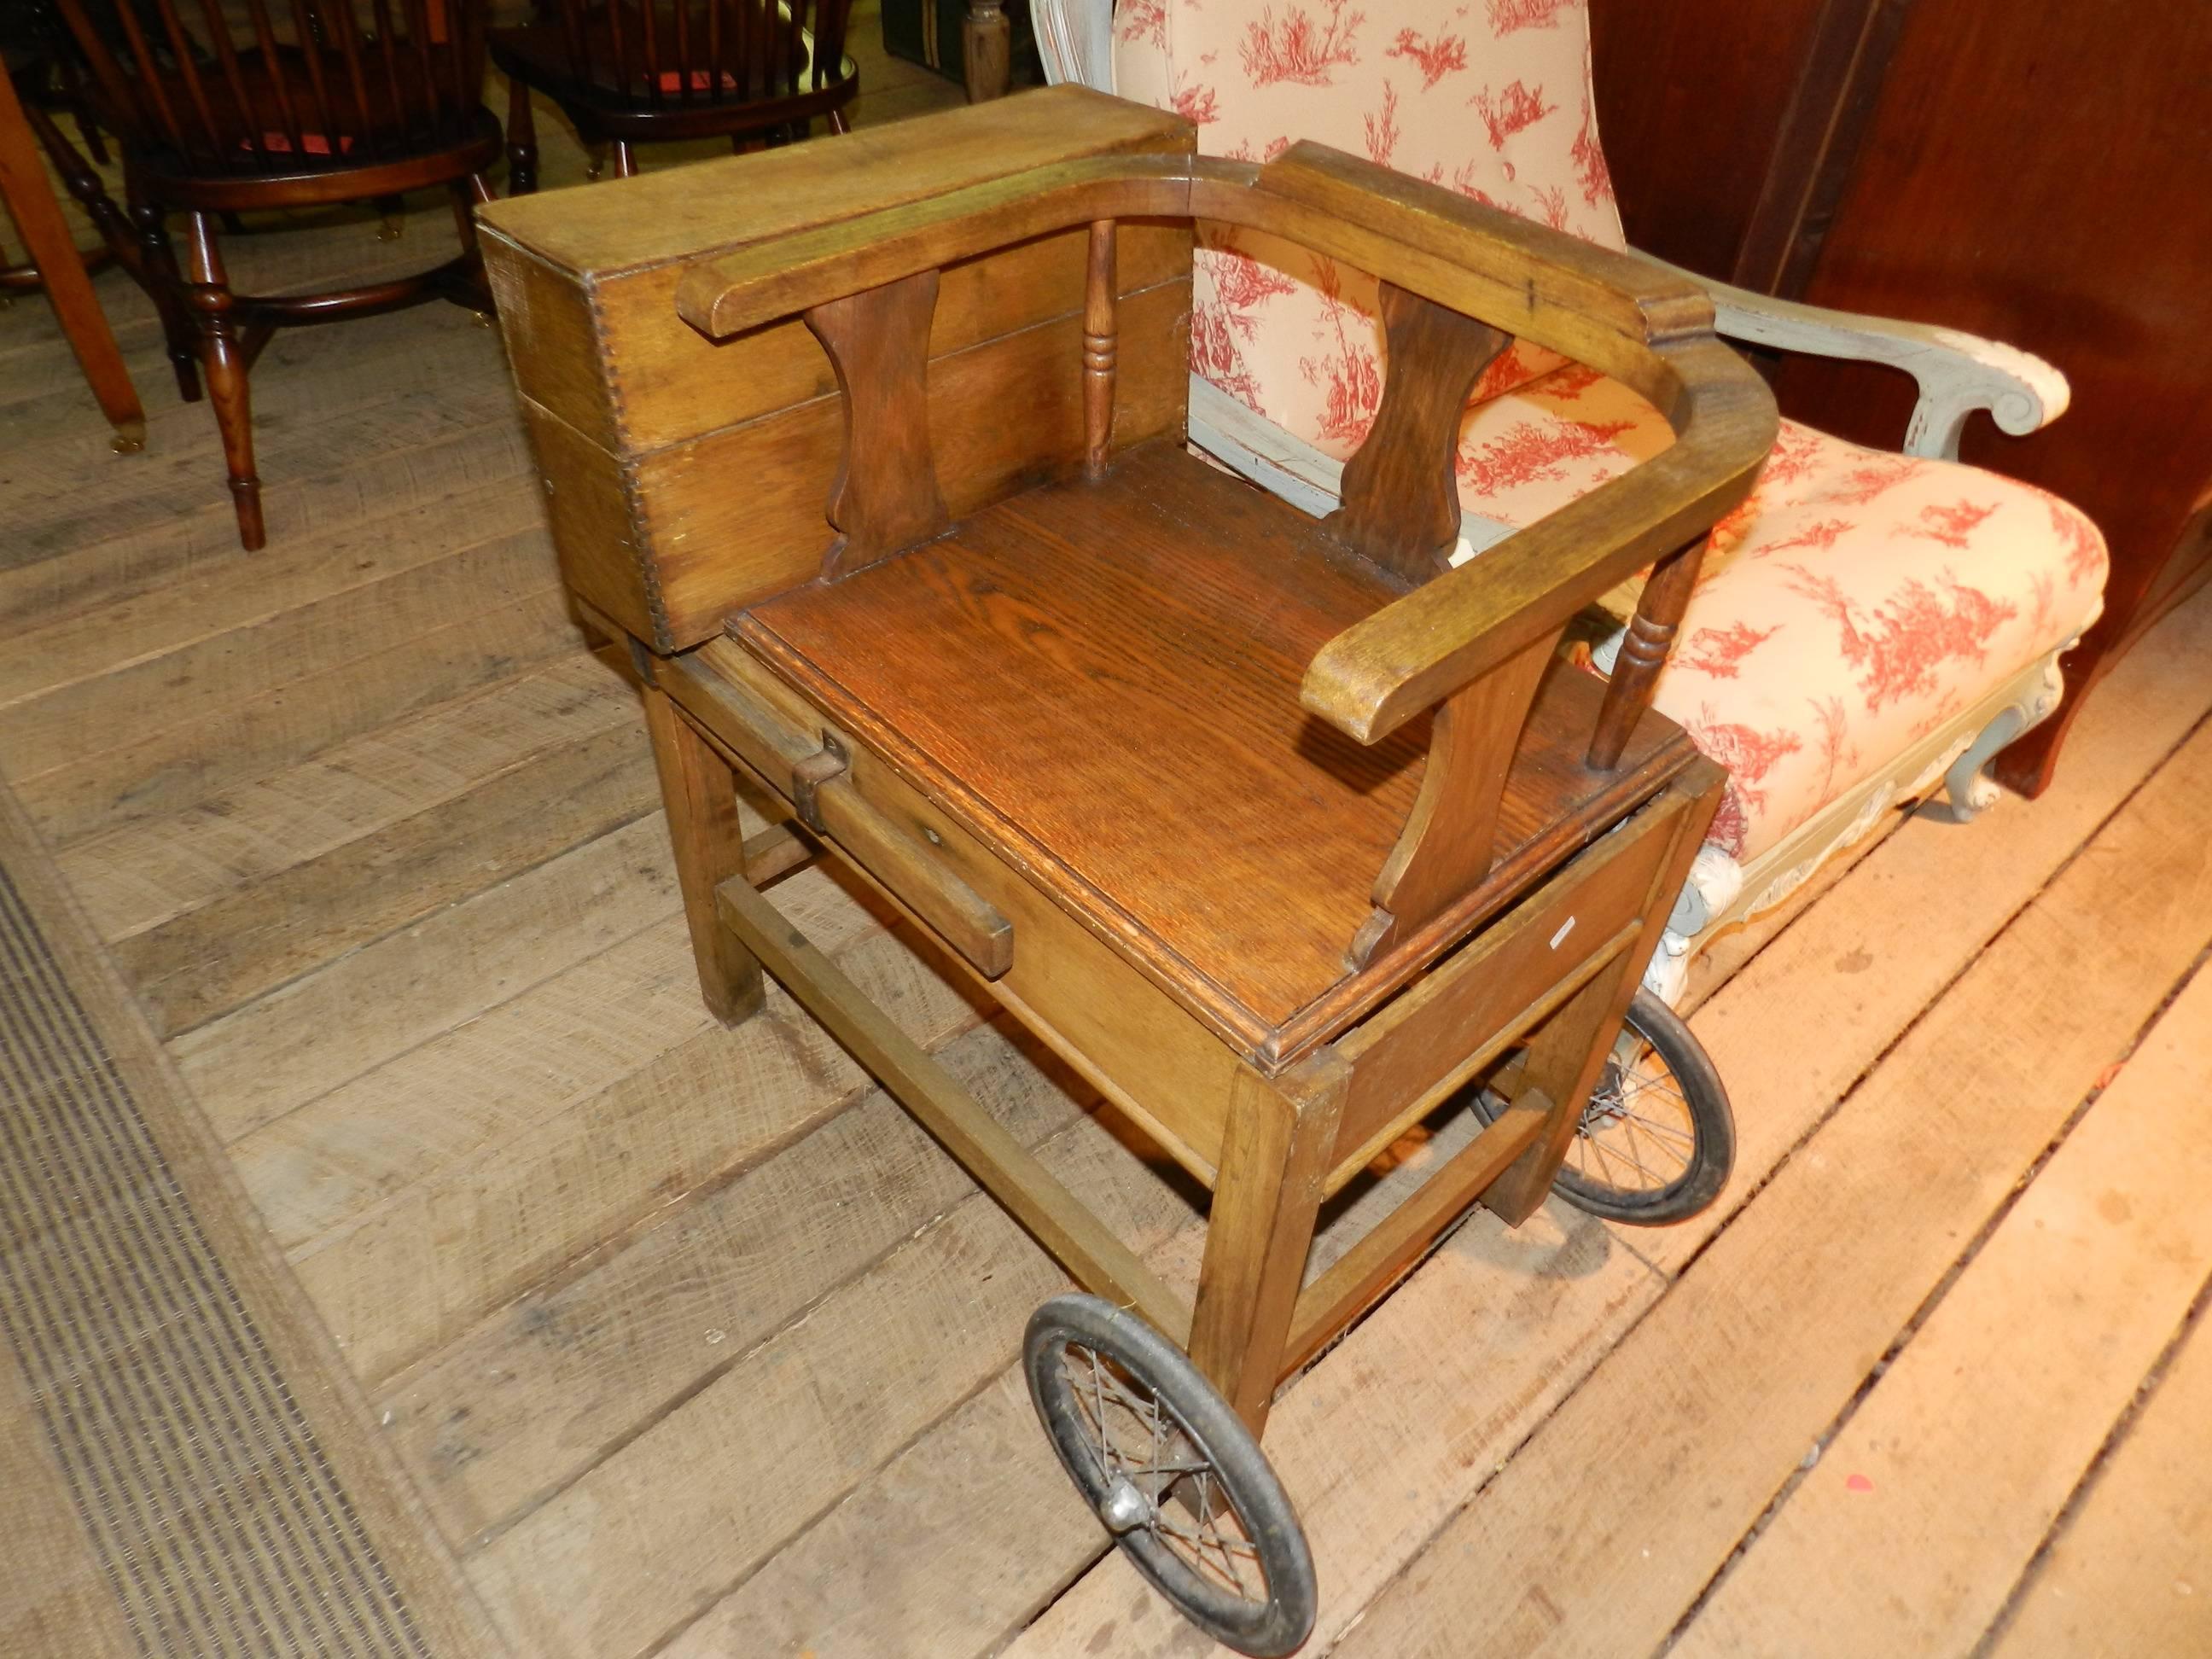 Antique oak jockey weighting scales with brass and iron scales, two extendable handles and two wheels.